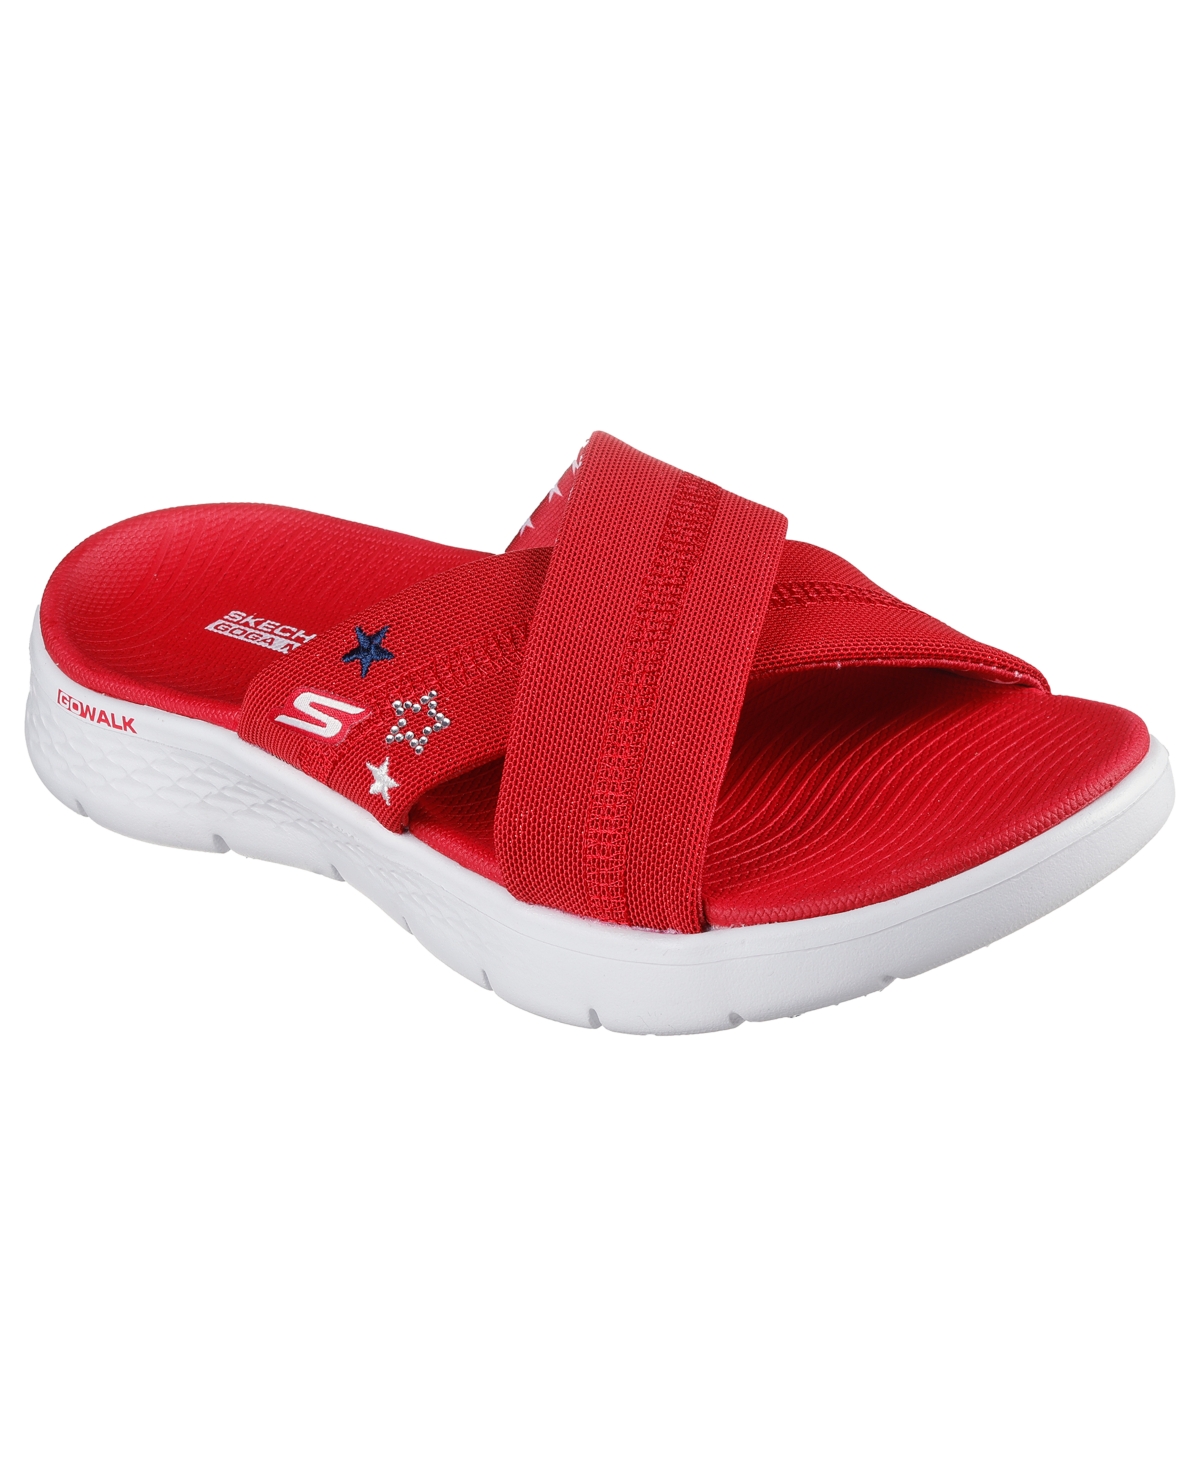 Women's Go Walk Flex Sandal - Patriotic Casual Sandals from Finish Line - RED